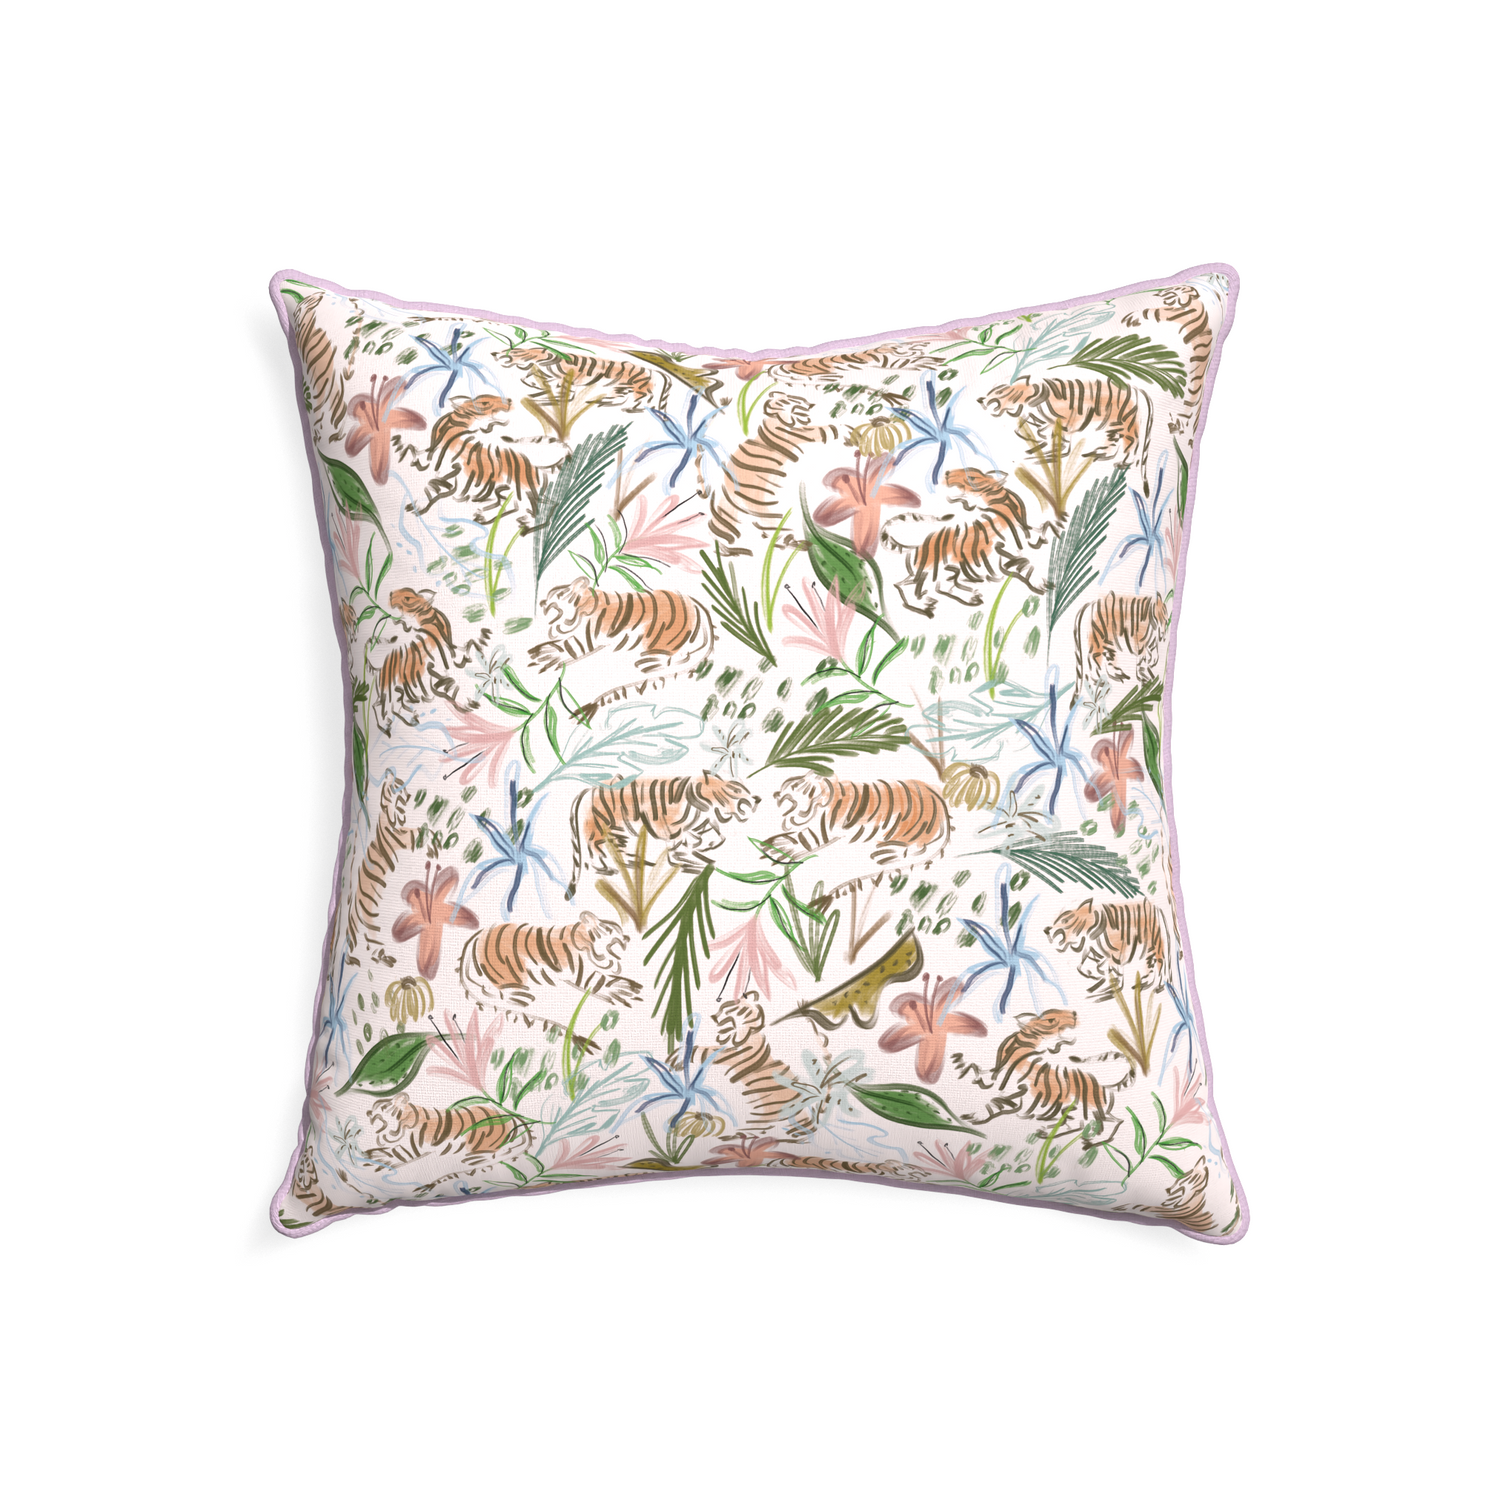 22-square frida pink custom pink chinoiserie tigerpillow with l piping on white background